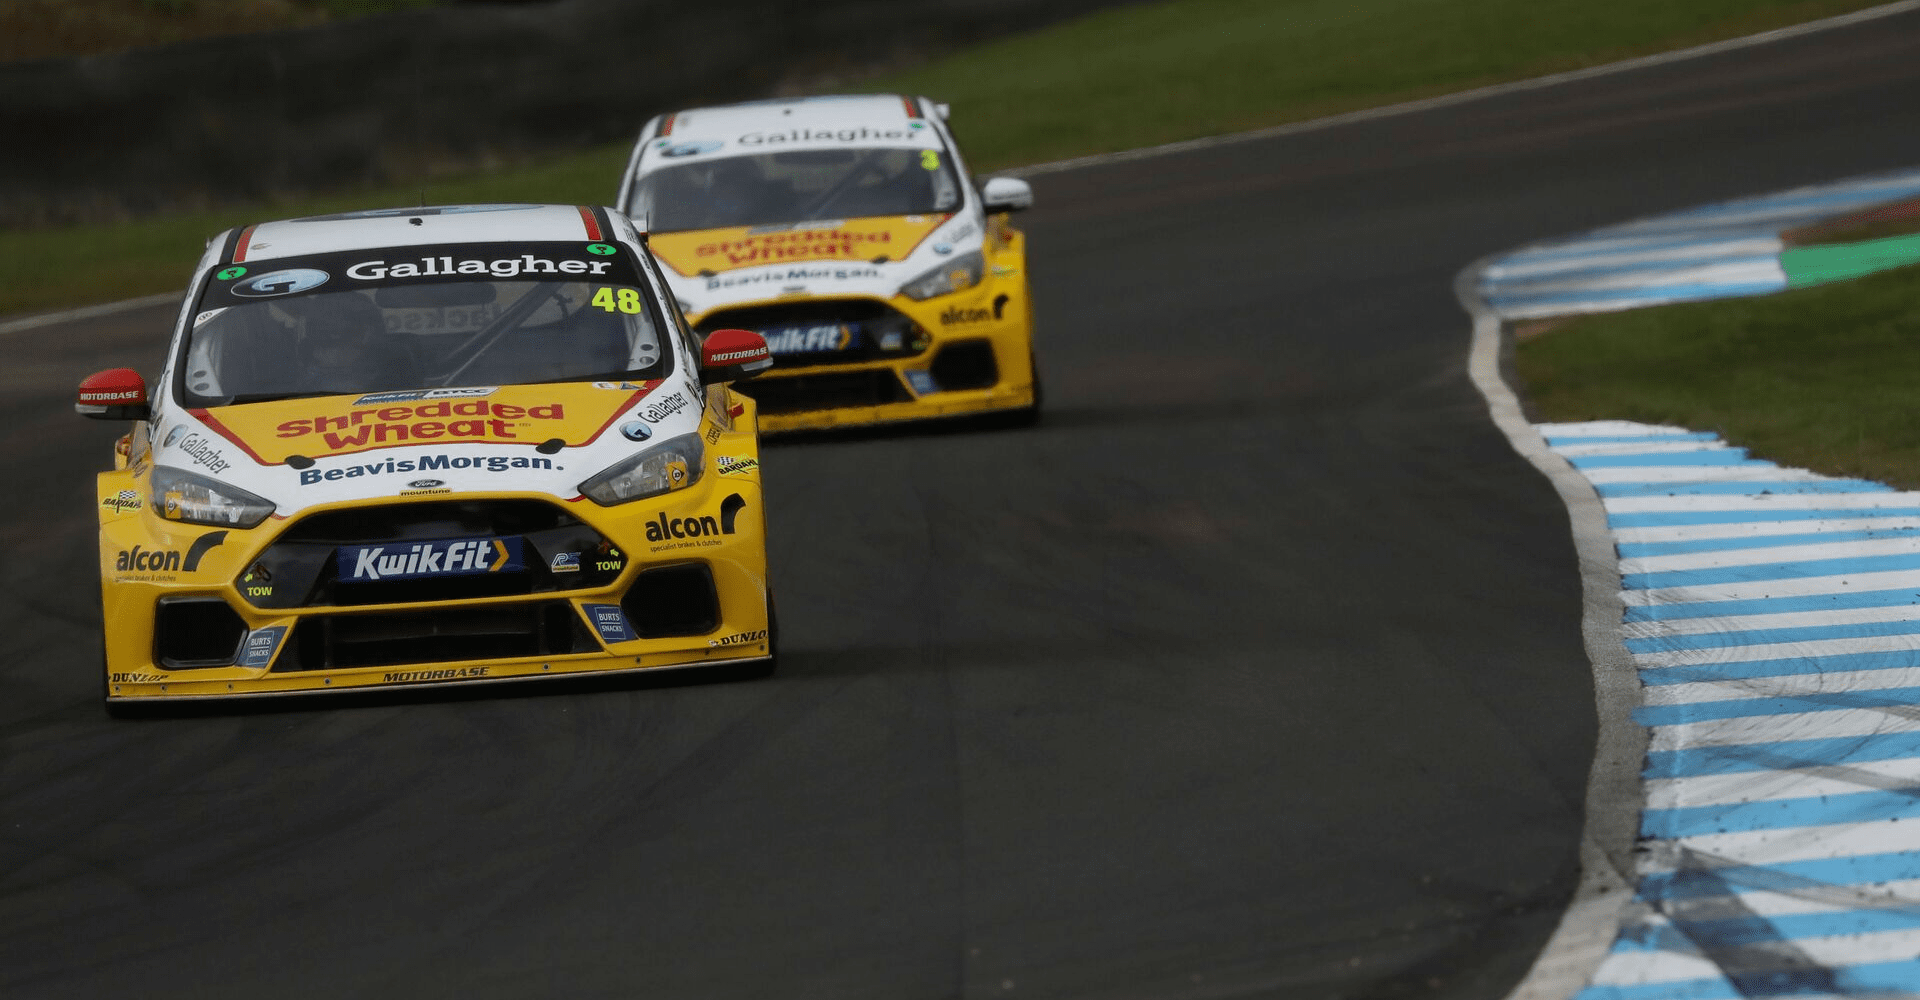 Team Shredded Wheat Racing with Gallagher on the hunt for Silverstone silverware